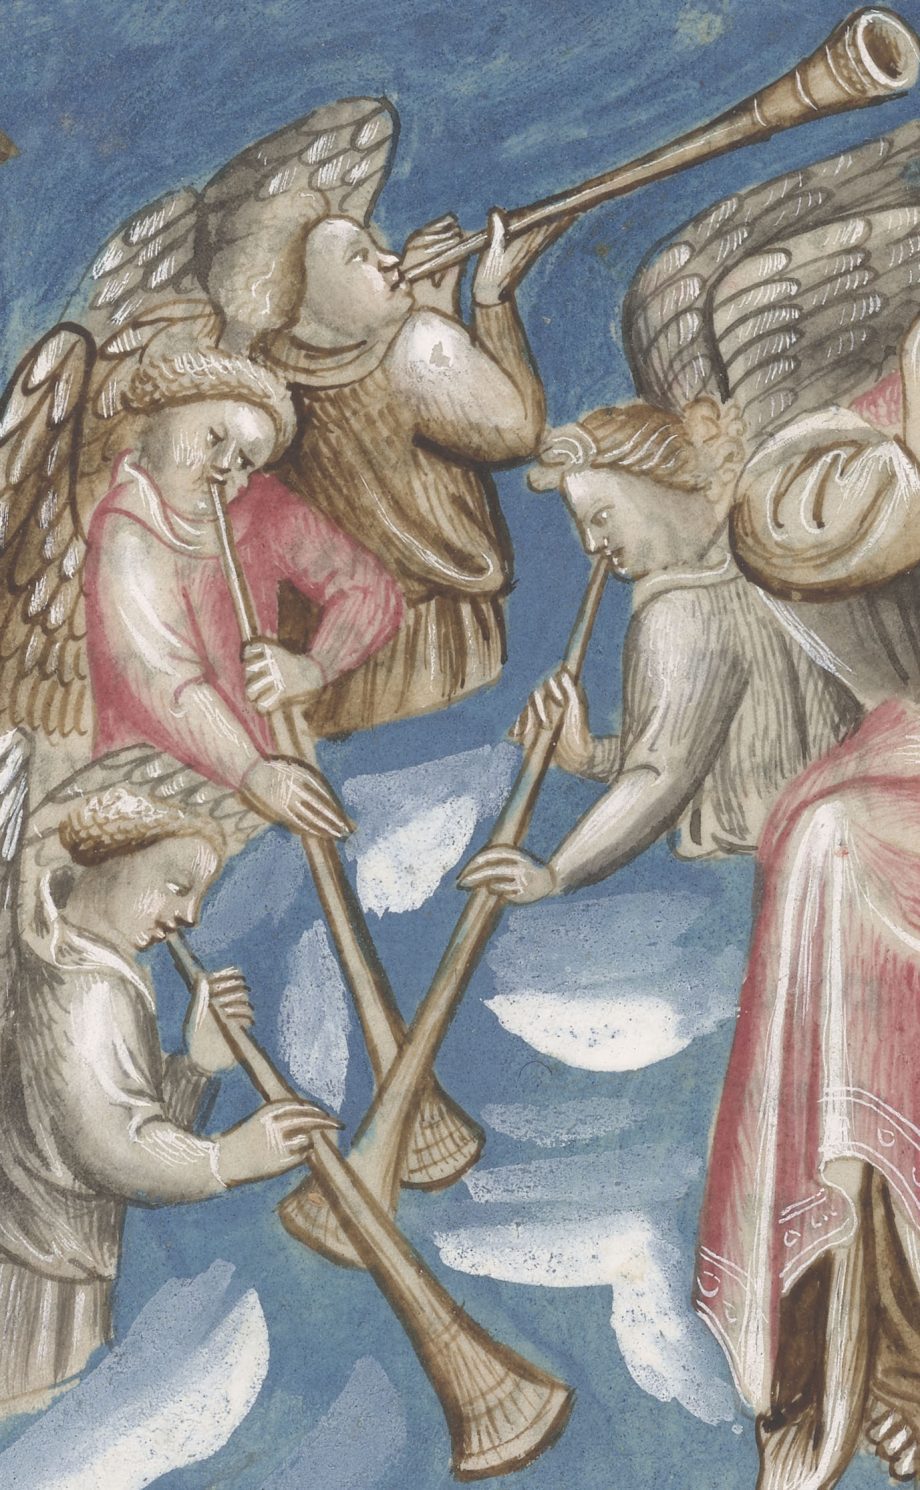 Folio 18 verso showing trumping angels, from The Morgan Library & Museum in New York, MS M.133; Paris, around 1410